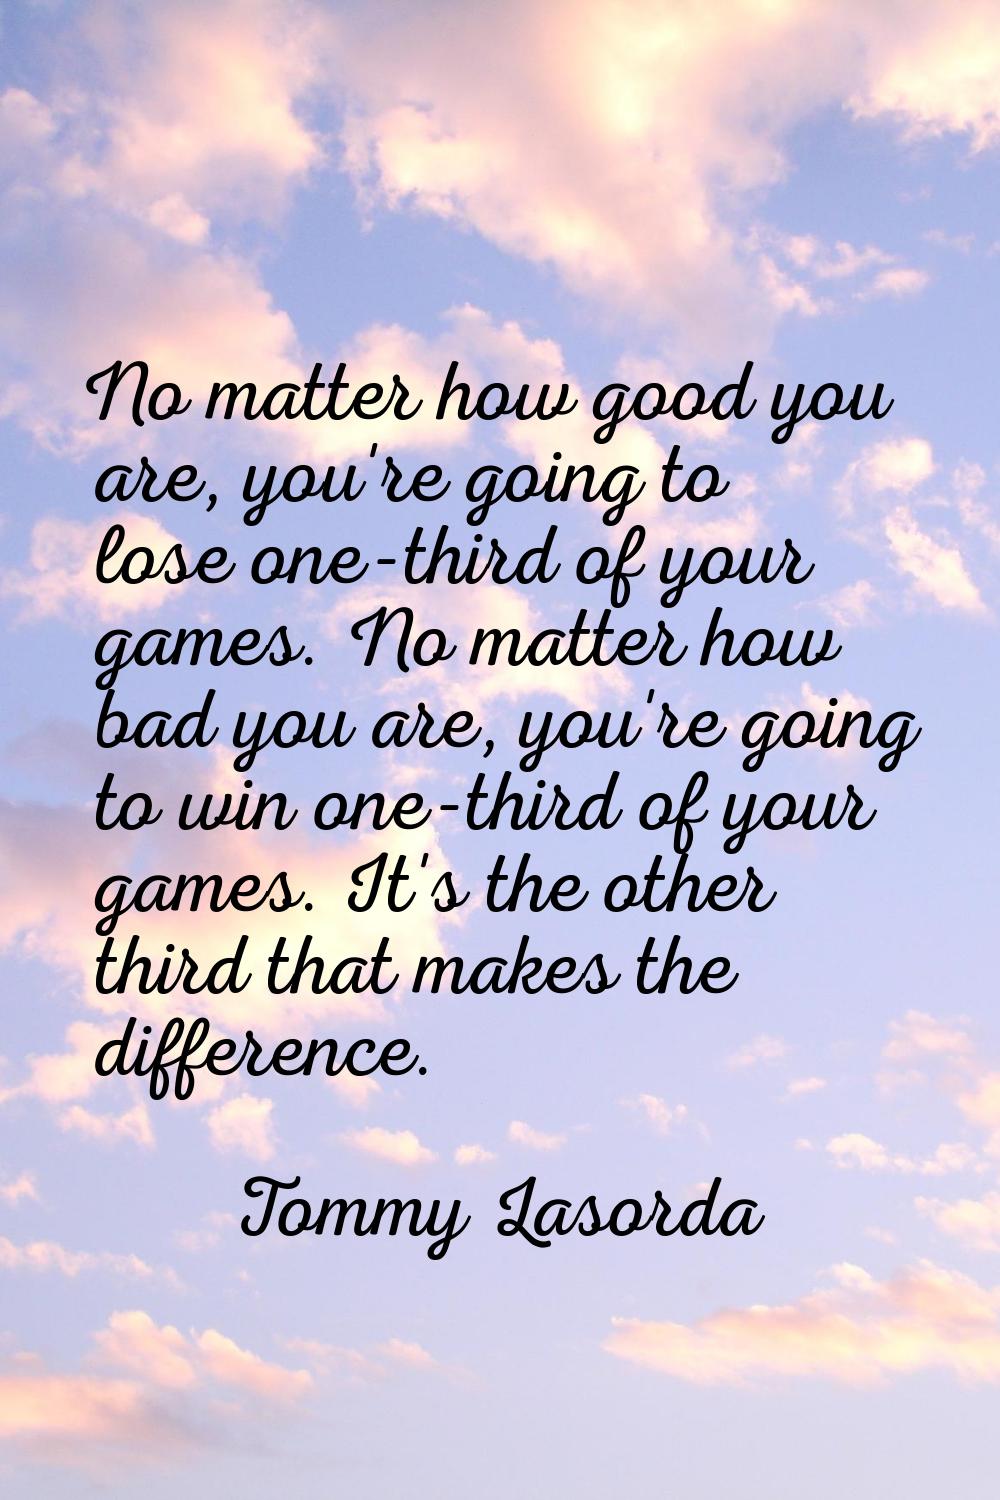 No matter how good you are, you're going to lose one-third of your games. No matter how bad you are